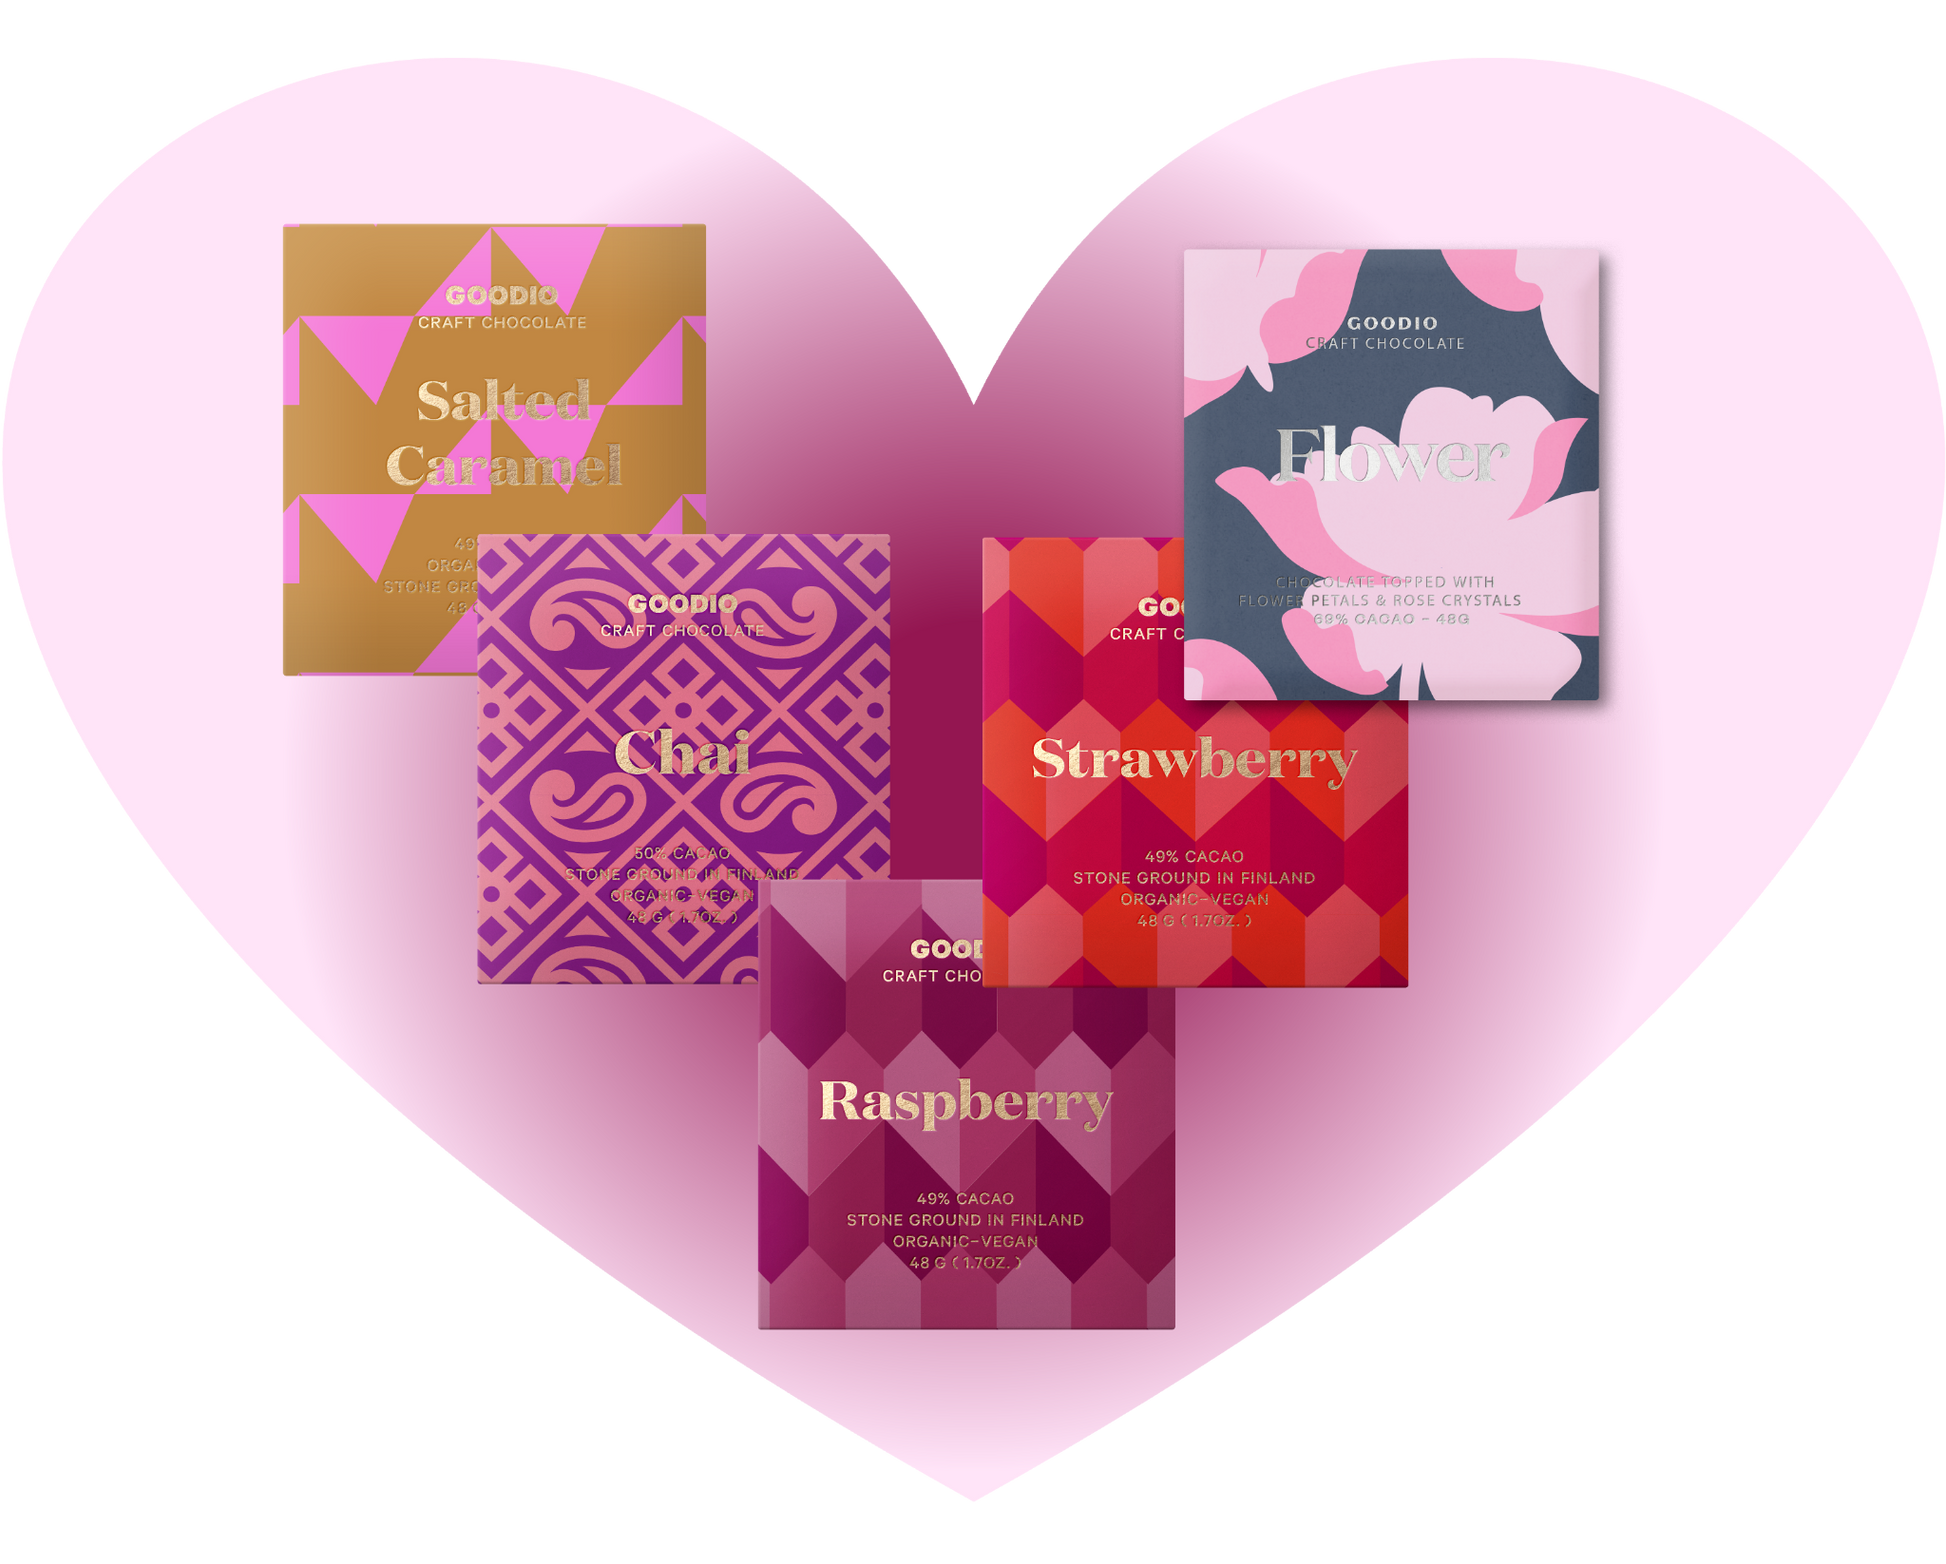 Pink Bundle a collection of Goodio love inspired flavors: Salted Caramel, Chai, Raspberry, Strawberry & Flower vegan chocolates